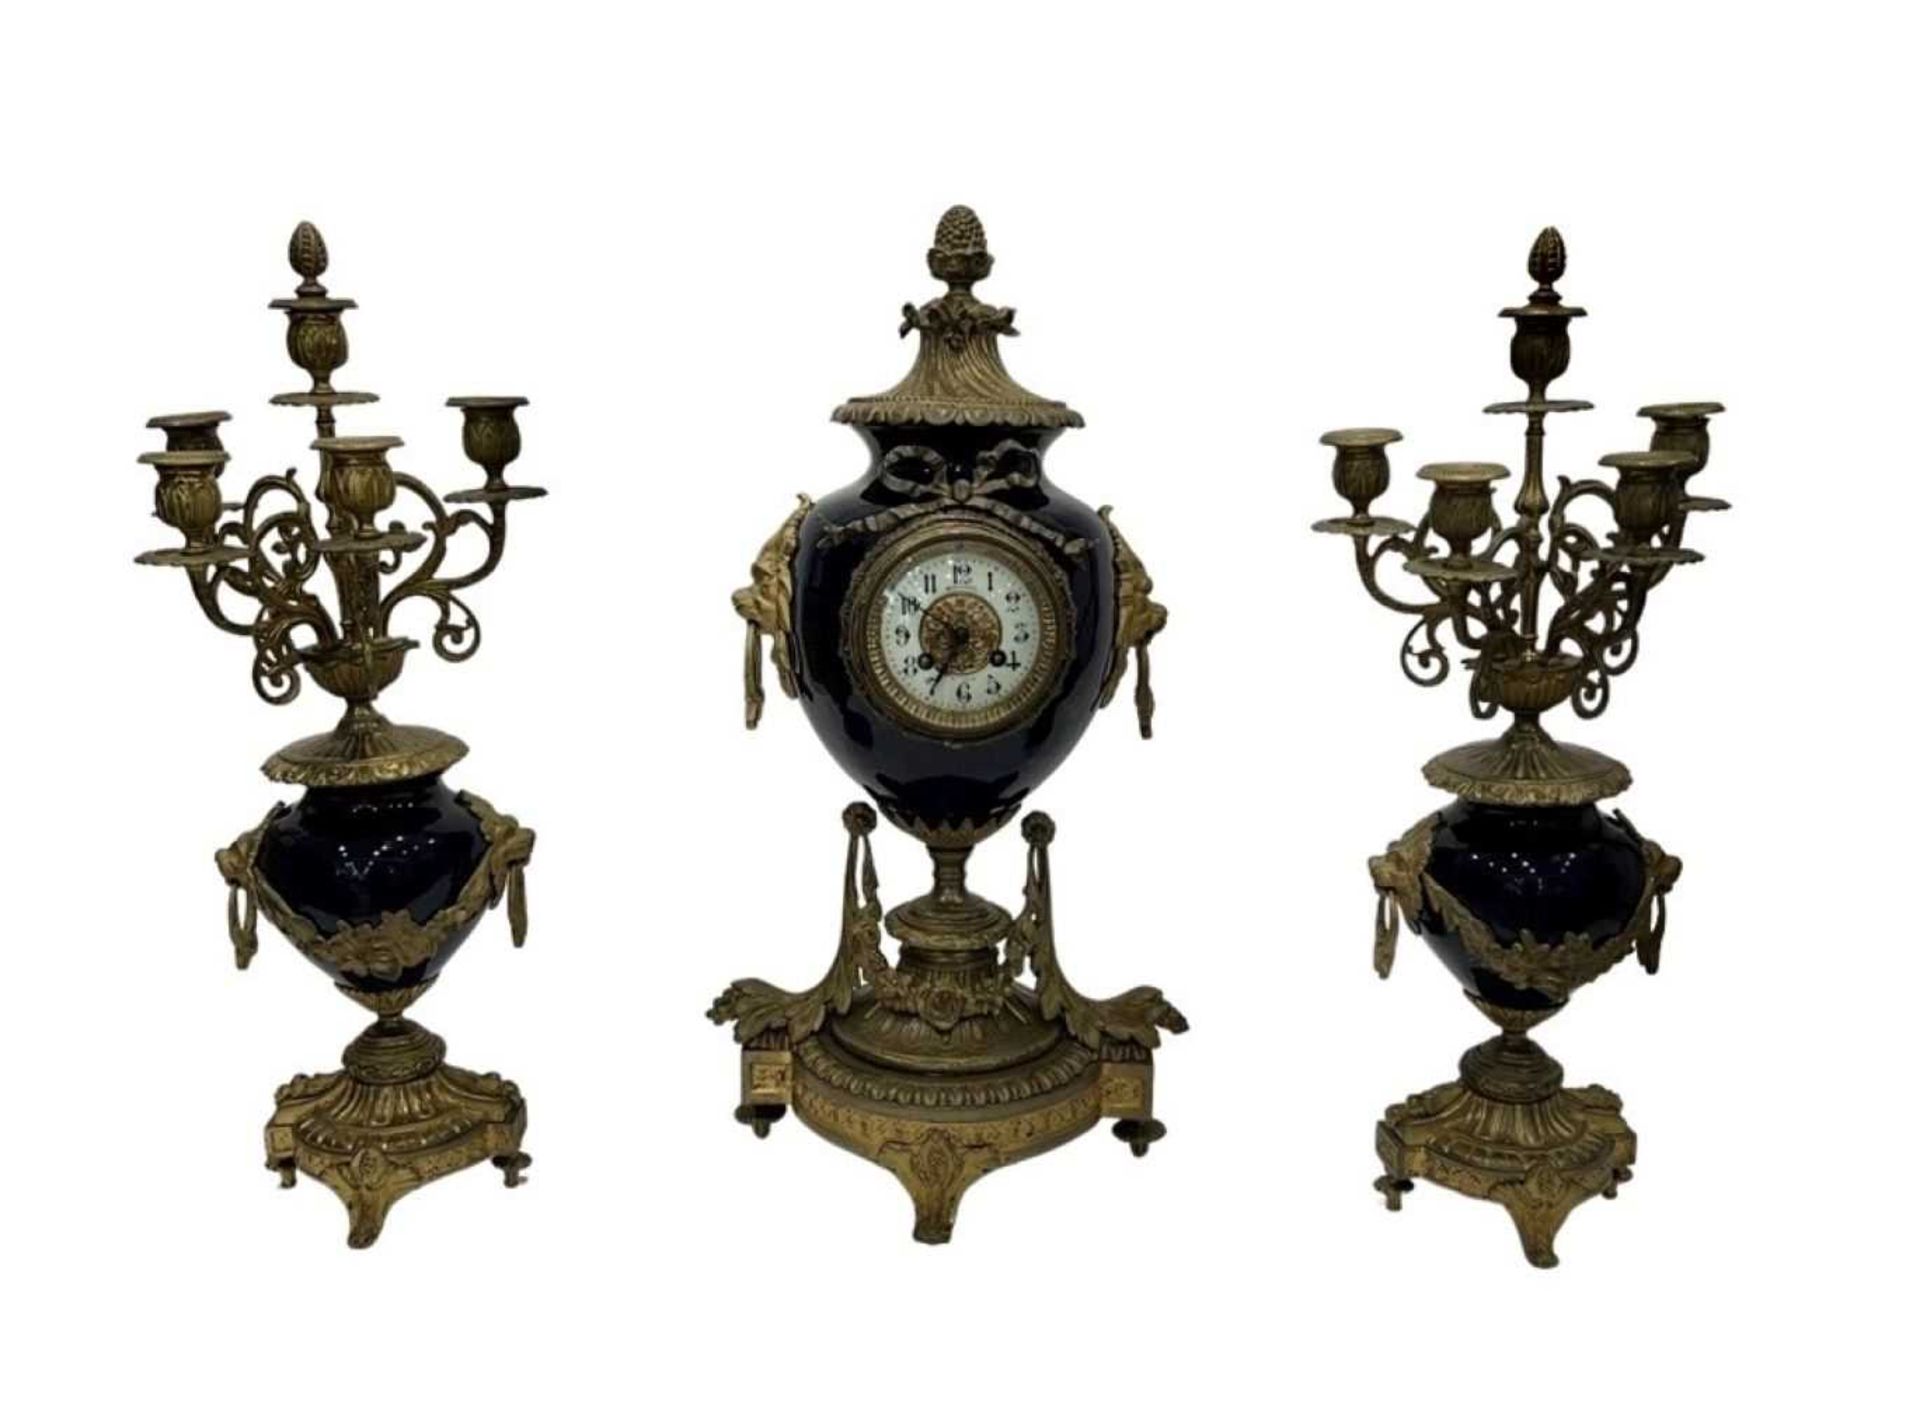 A LATE 19TH CENTURY FRENCH PORCELAIN AND GILT BRONZE MOUNTED CLOCK GARNITURE